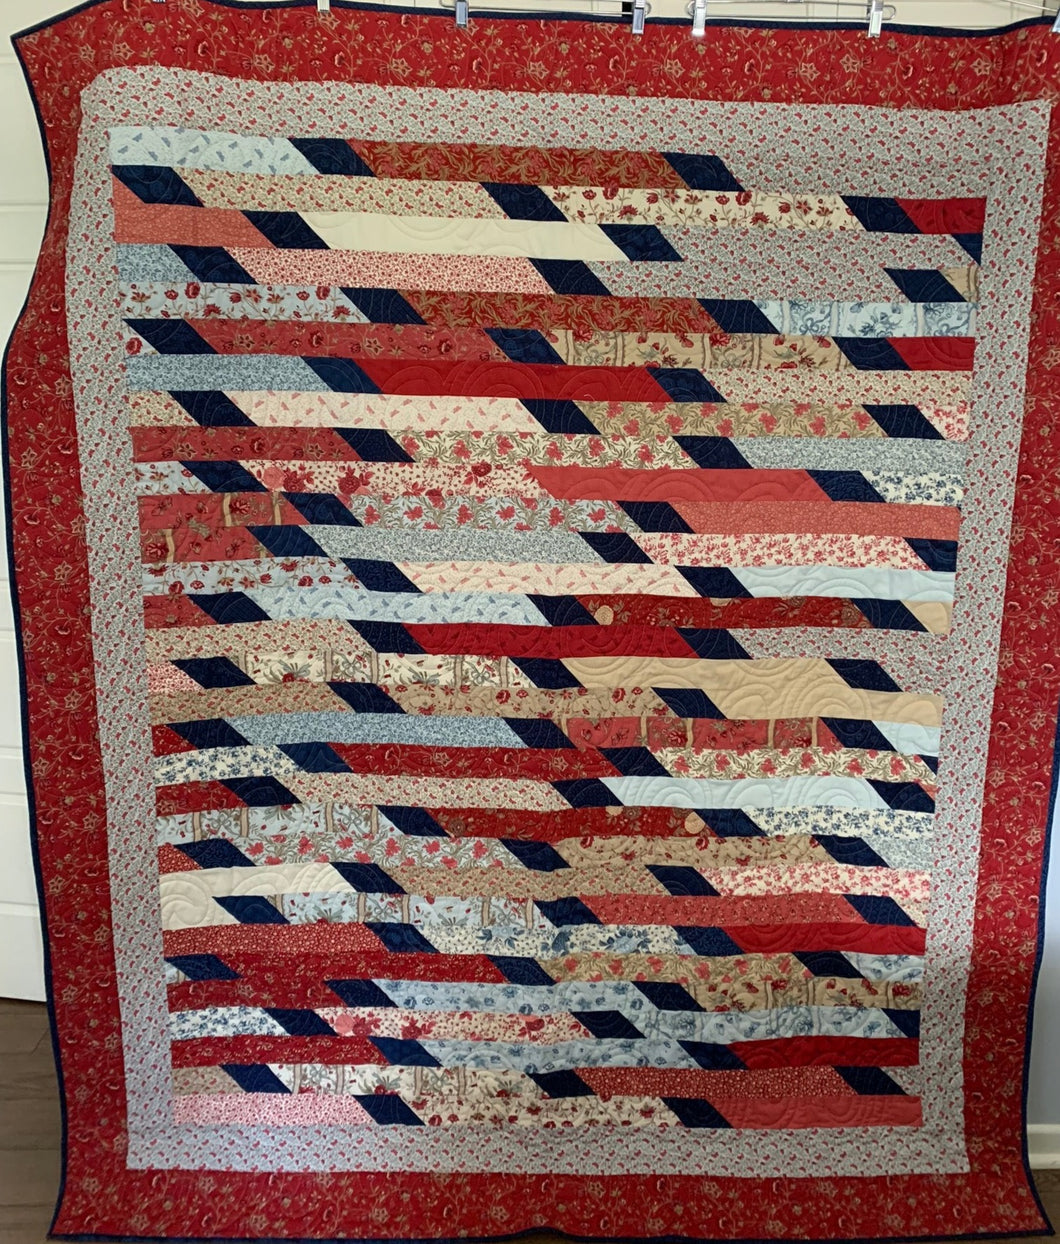 One-of-a-Kind Amish Style Quality Handmade Quilt, “Benny” is 66w x 79l, Reds, Blues, Greens and Ivory